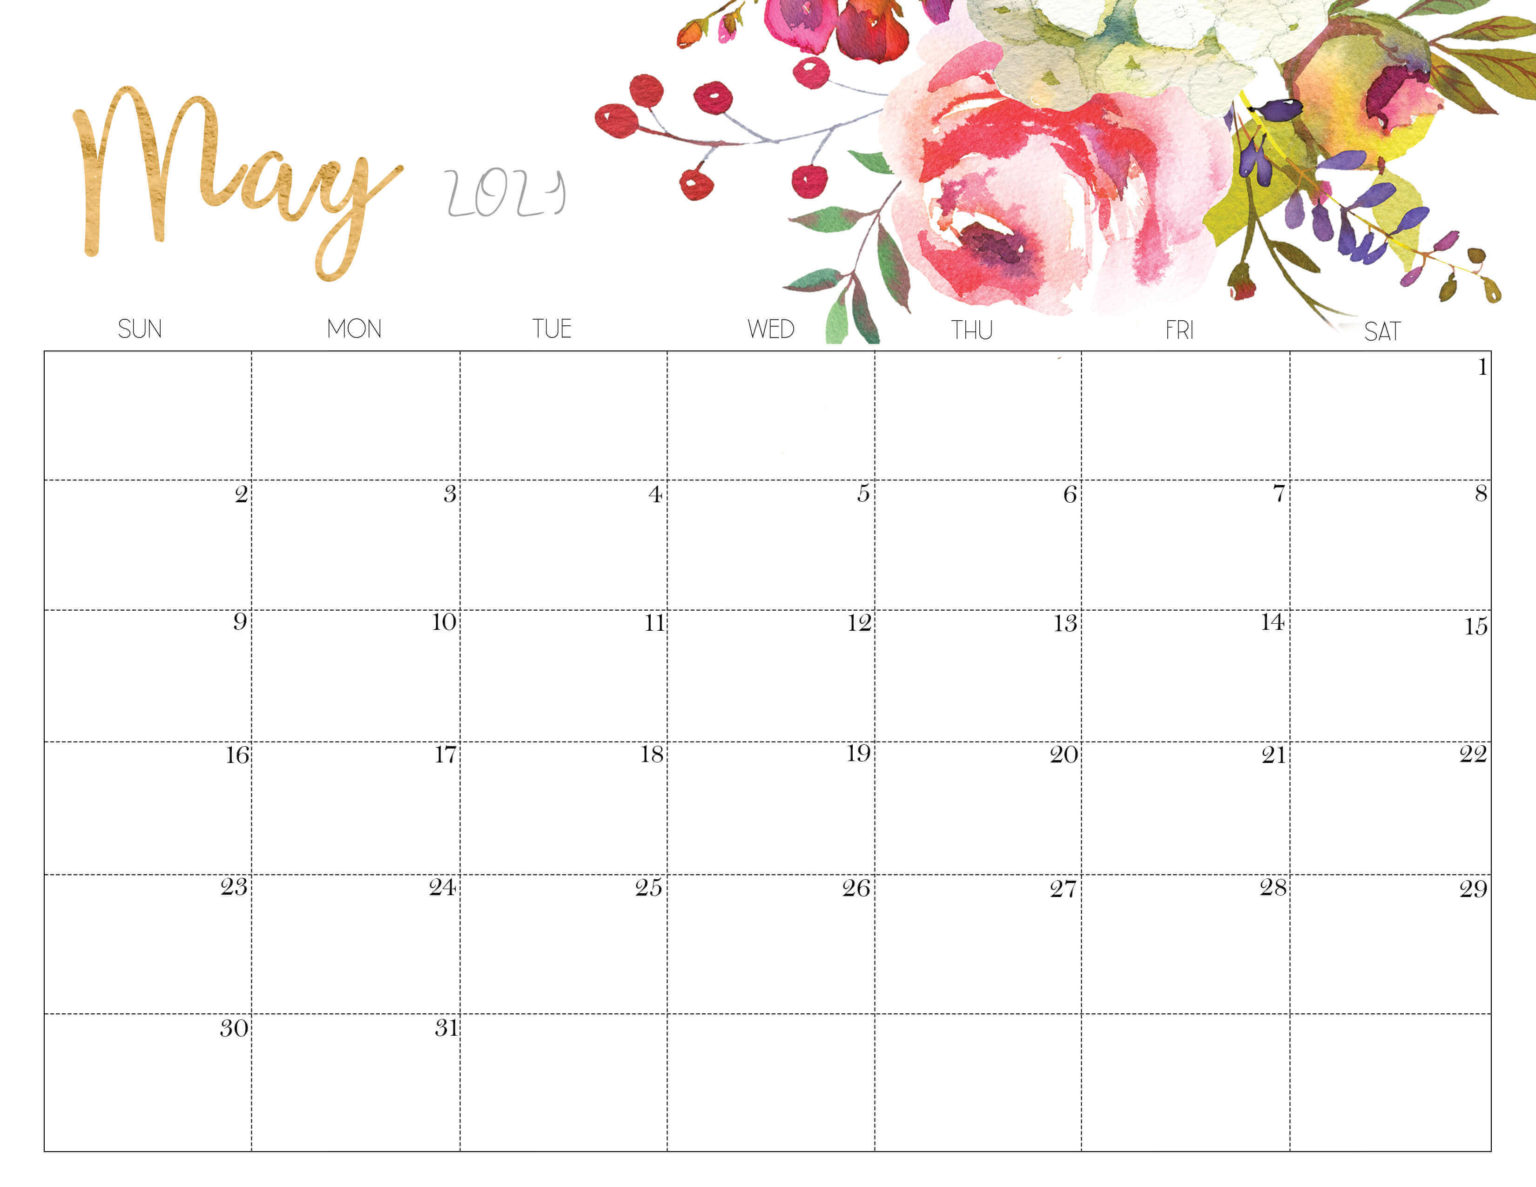 Cute May 2021 Calendar Printable Designs For Kids, Students, Home, Offices